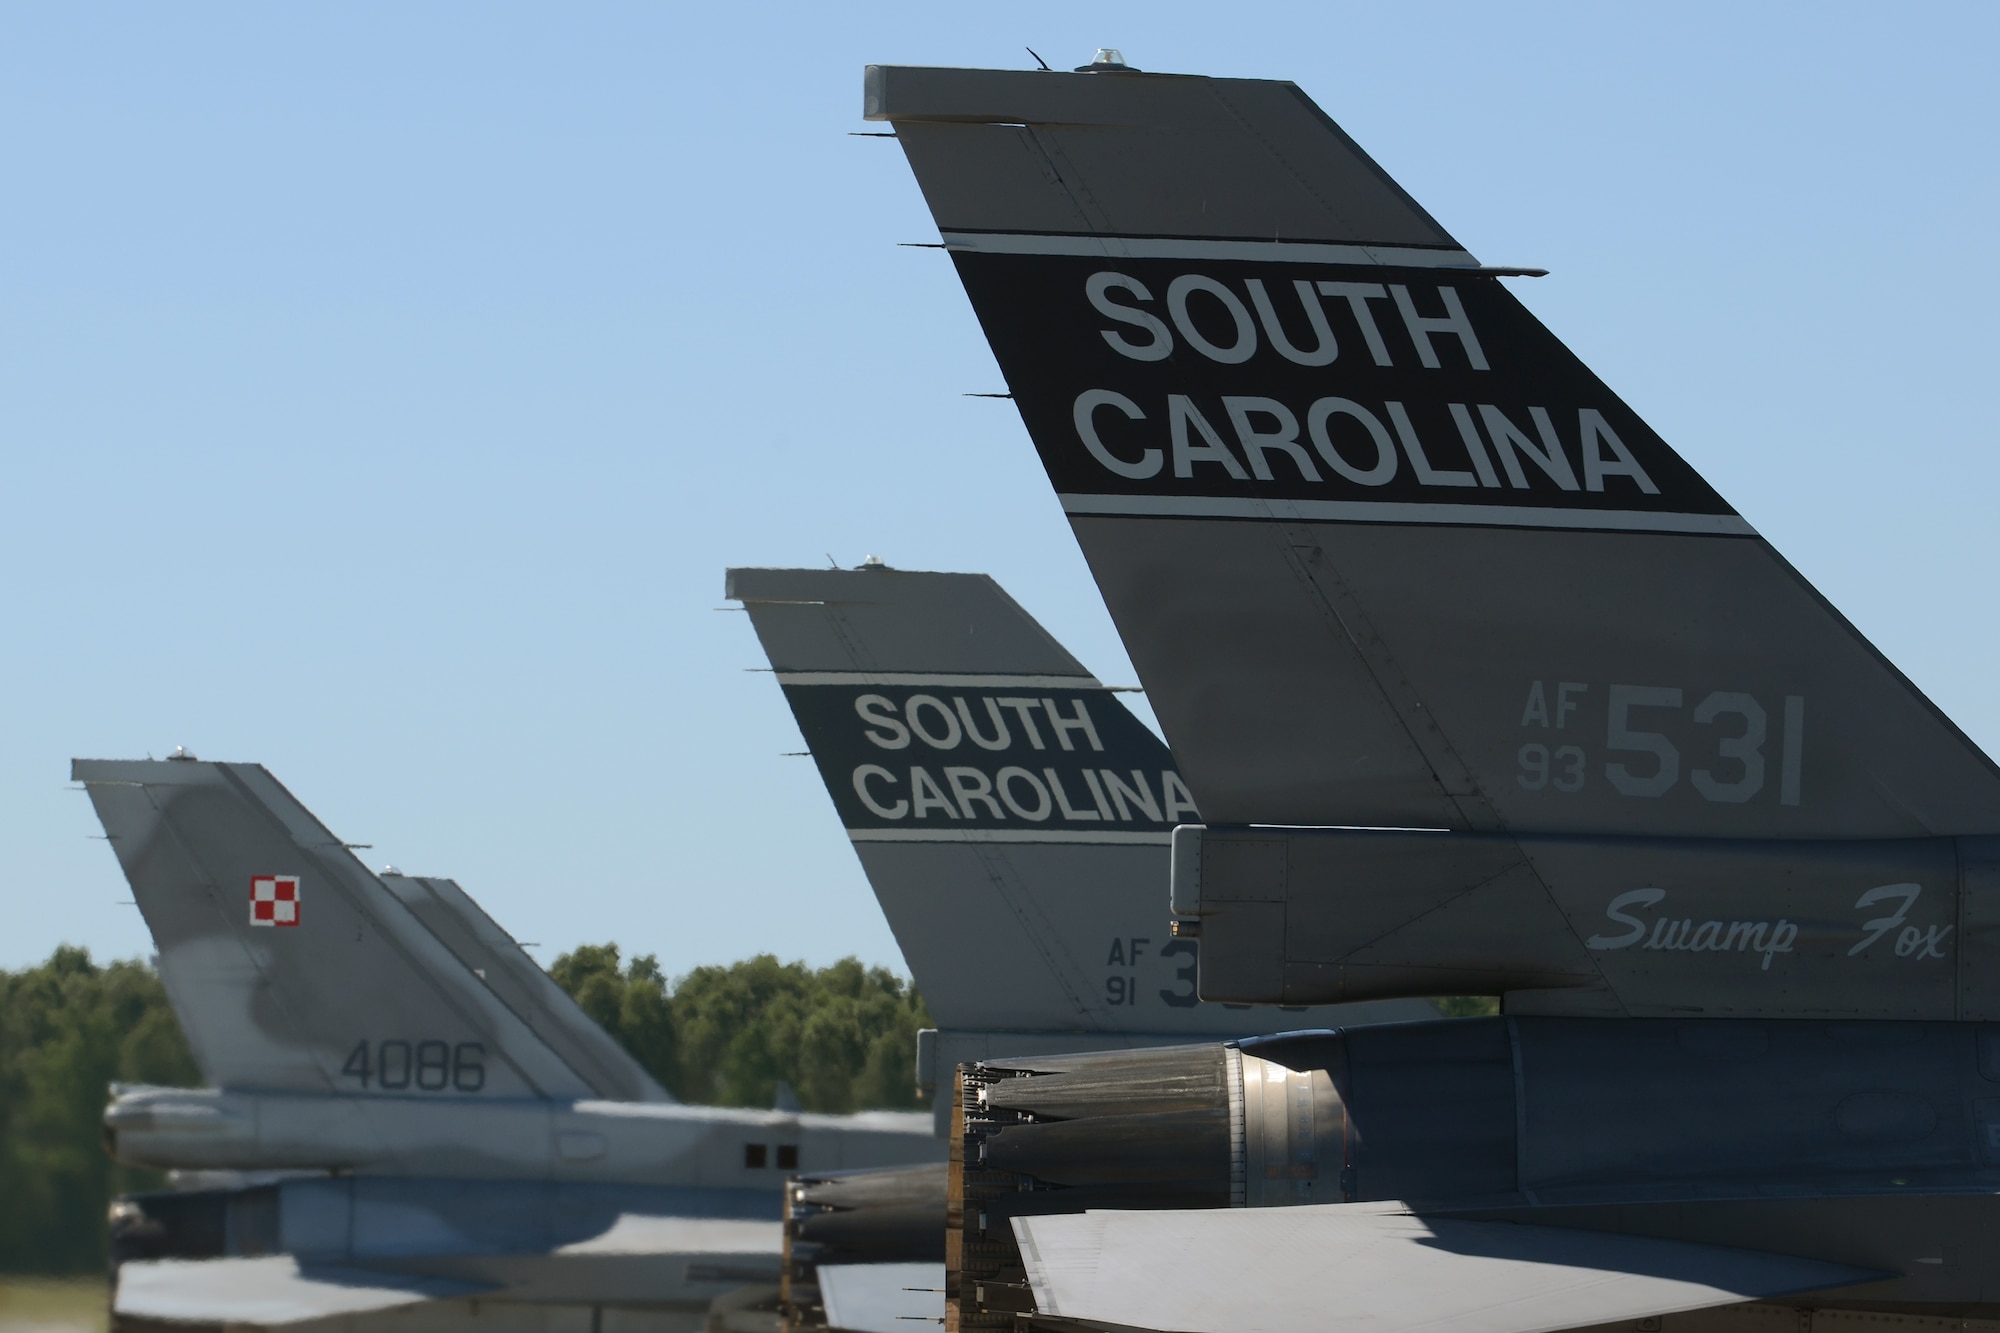 F-16 fighter jets from Poland's 32nd Tactical Air Base and the South Carolina Air National Guard are lined-up for end-of-runway procedures to make final preparations for takeoff at Łask Air Base, Poland in support of Operation Atlantic Resolve, June 5, 2015. U.S. Air Force Airmen from Spangdahlem Air Base, Germany, and the South Carolina Air National Guard’s 169th Fighter Wing from McEntire Joint National Guard Base, are deployed to Łask Air Base in support of Operation Atlantic Resolve, during the month of June. These training missions, called aviation detachment rotations, pair U.S. fighter pilots and maintenance crews with their Polish Air Force counterparts at Łask Air Base, during Operation Atlantic Resolve. This rotation, AvDet 15-3, is the first to combine guard/reserve and active-duty units in Poland to offer more diverse opportunities to share best practices and build professional relationships with the Polish air force. This bilateral training, hosted by permanently assigned USAF service members assigned to Poland, has taken place since 2012. Through strengthened relationships and engagements with our allies, the U.S. and NATO demonstrate their shared commitment to a peaceful, stable and secure Europe. (South Carolina Air National Guard photo by Senior Master Sgt. Edward Snyder / RELEASED)